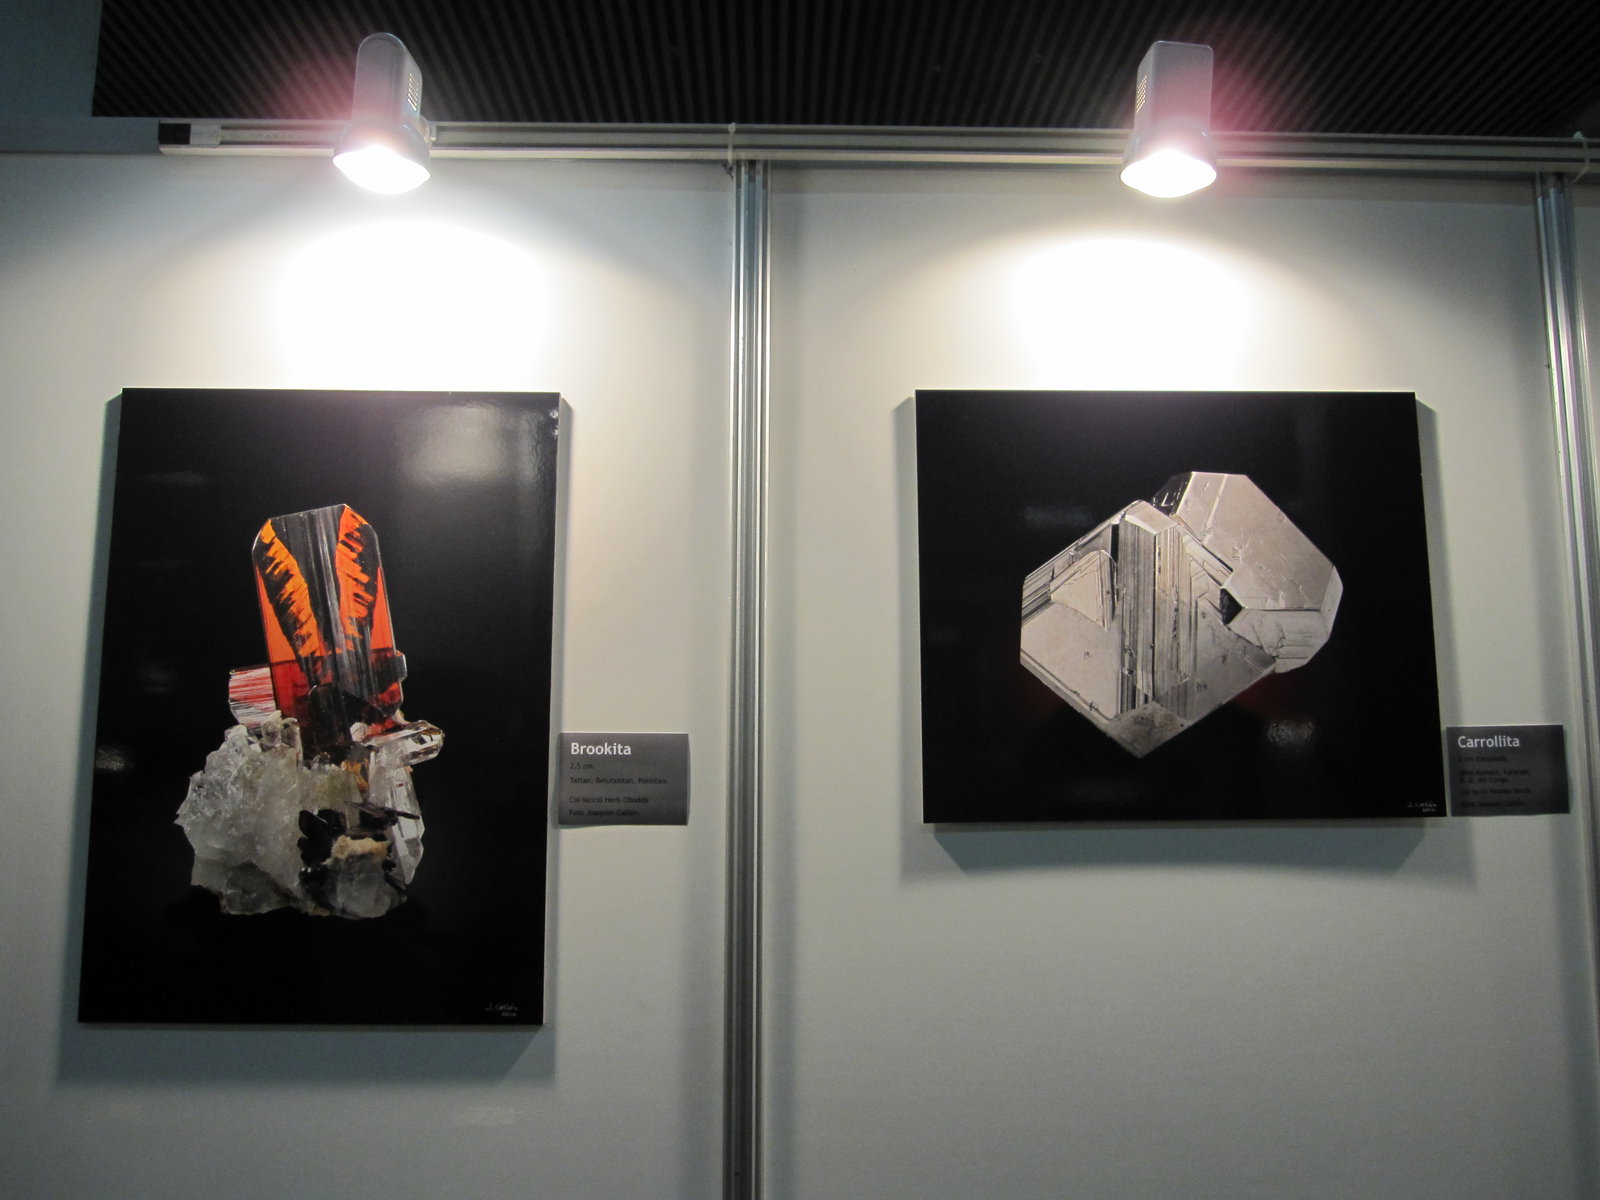 /include/Virtuals/AP3-E2022/images/Expominer2010-Exposicion.jpg